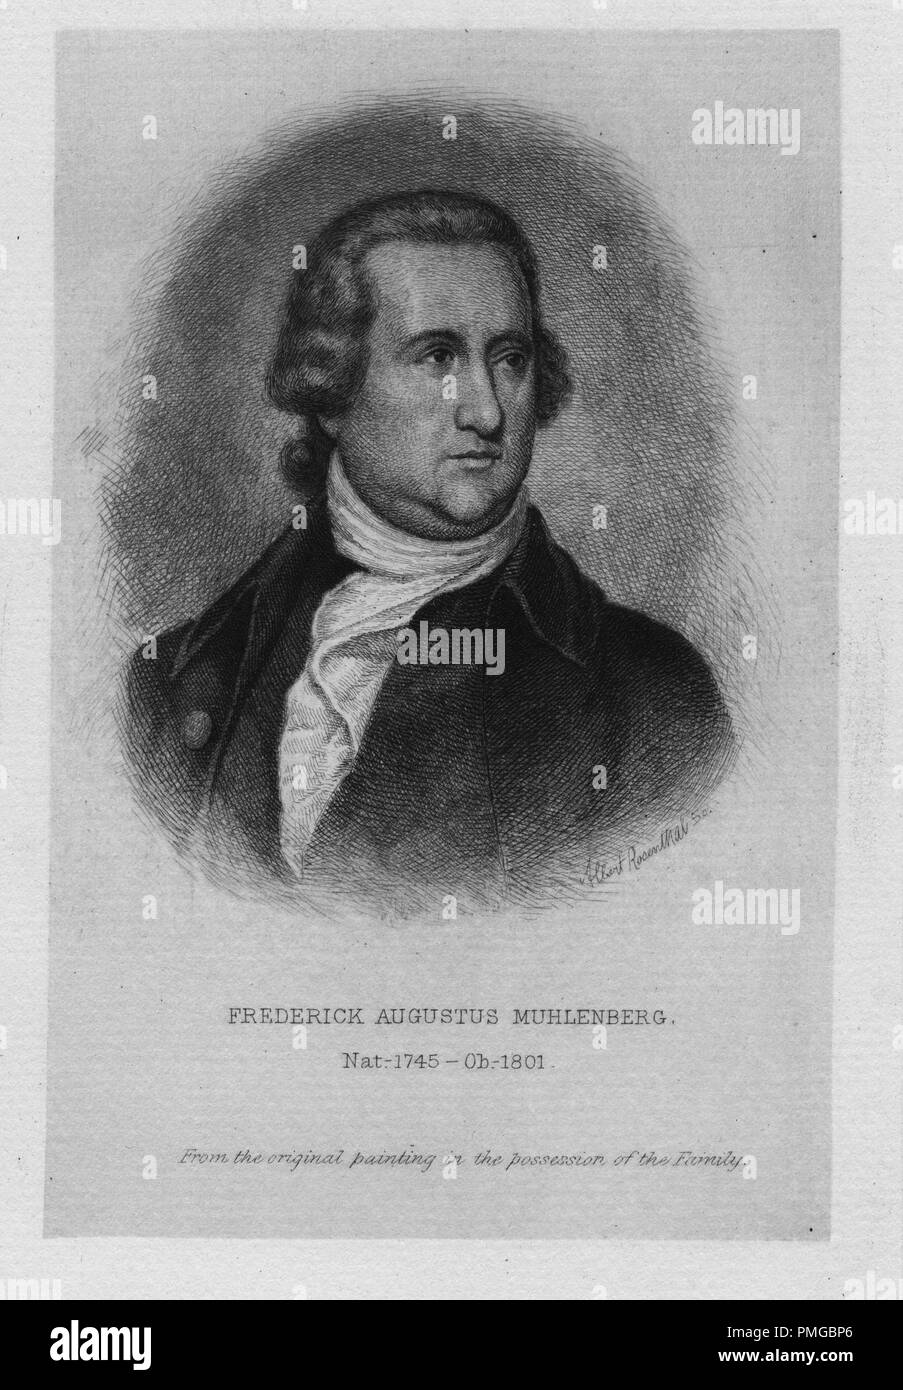 Engraved portrait of Frederick Augustus Muhlenberg, member of the Continental Congress from Pennsylvania, 1841. From the New York Public Library. () Stock Photo